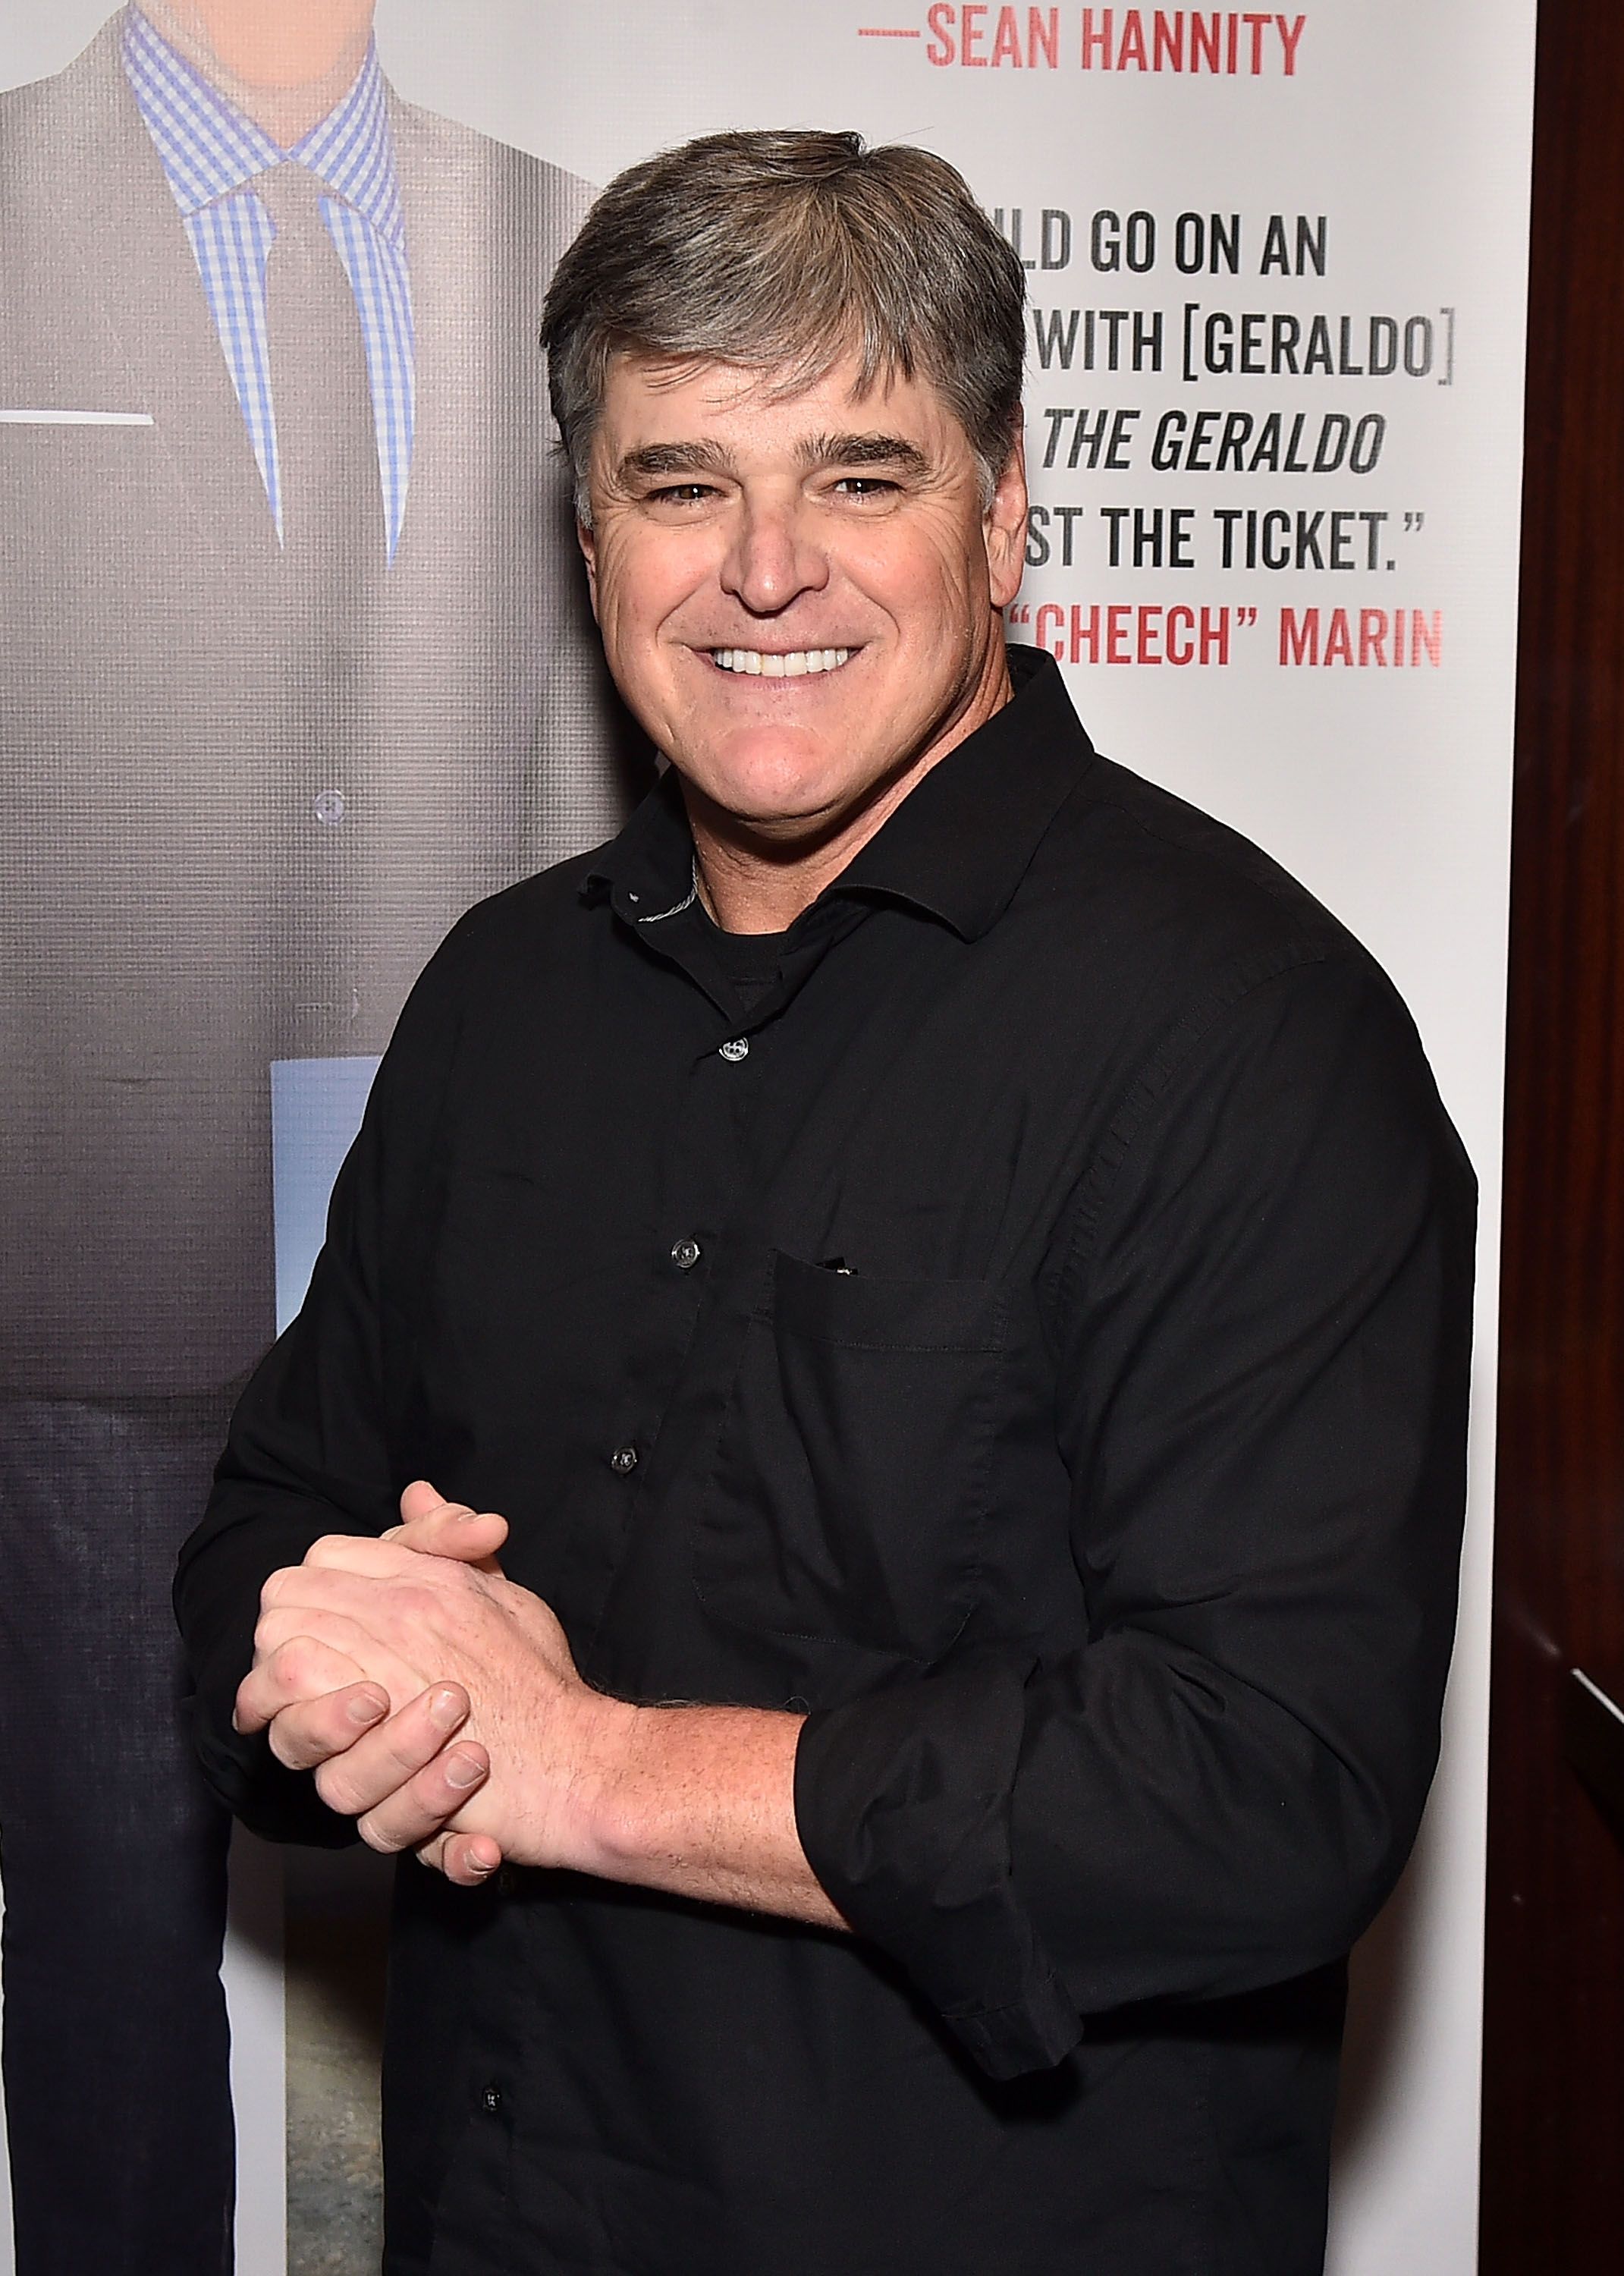 Sean Hannity in attendance as Geraldo Rivera Launches His New Book "The Geraldo Show: A Memoir" at Del Frisco's Grille on April 2, 2018 | Photo: Getty Images